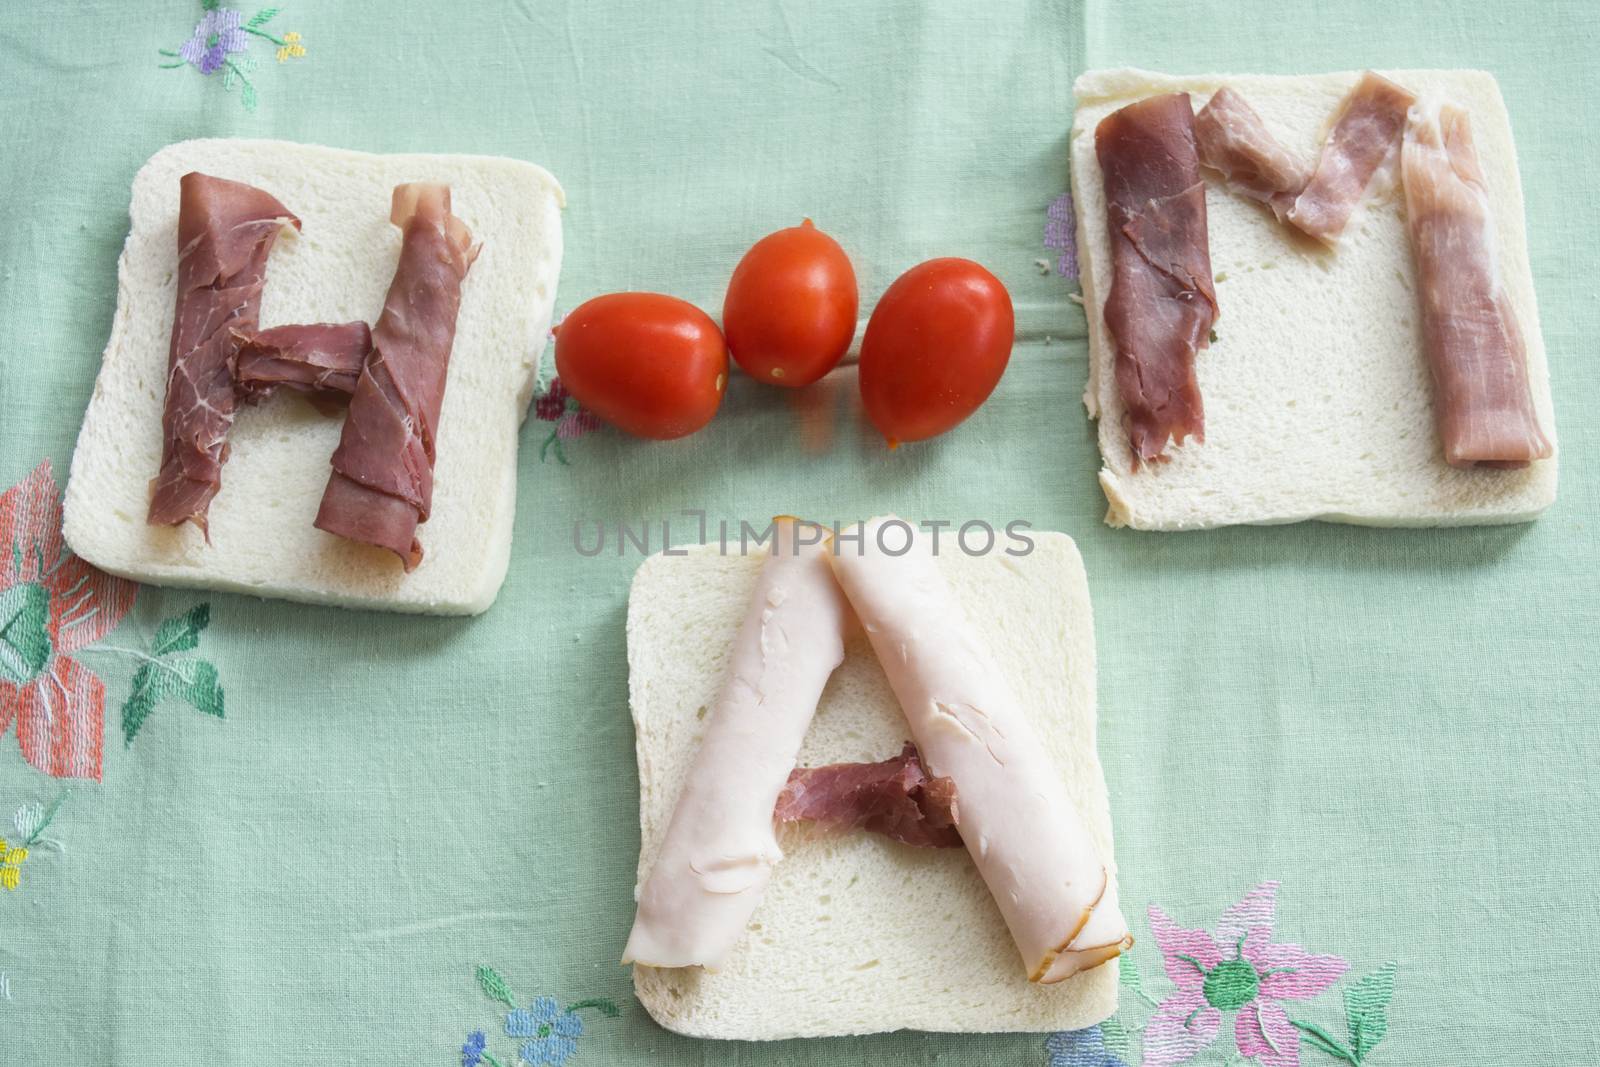 writing ham made with slices of mixed ham on slices of sandwich breads